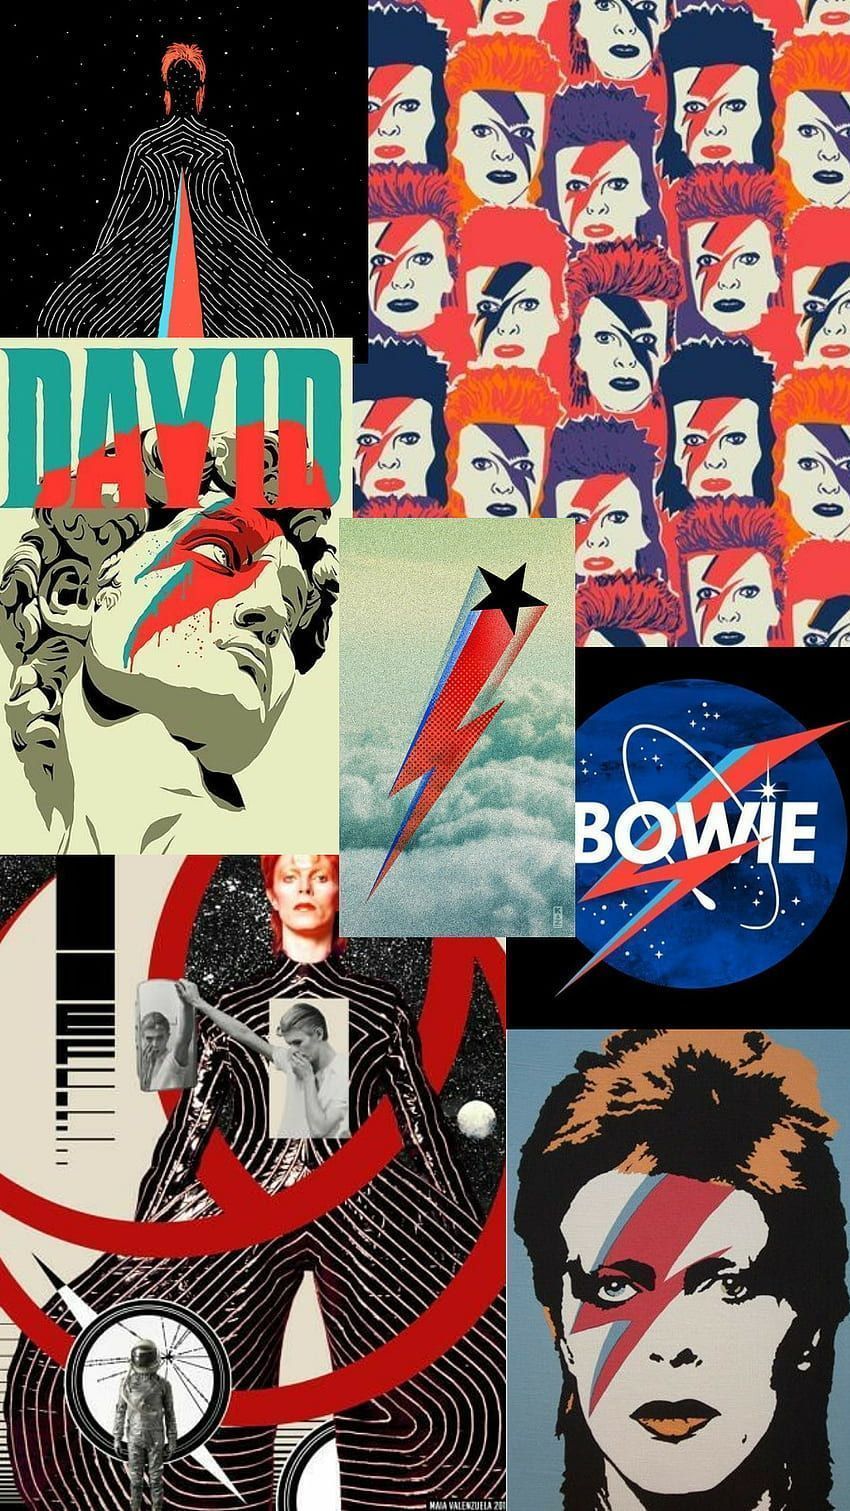 A collage of David Bowie's album covers and artwork. - David Bowie